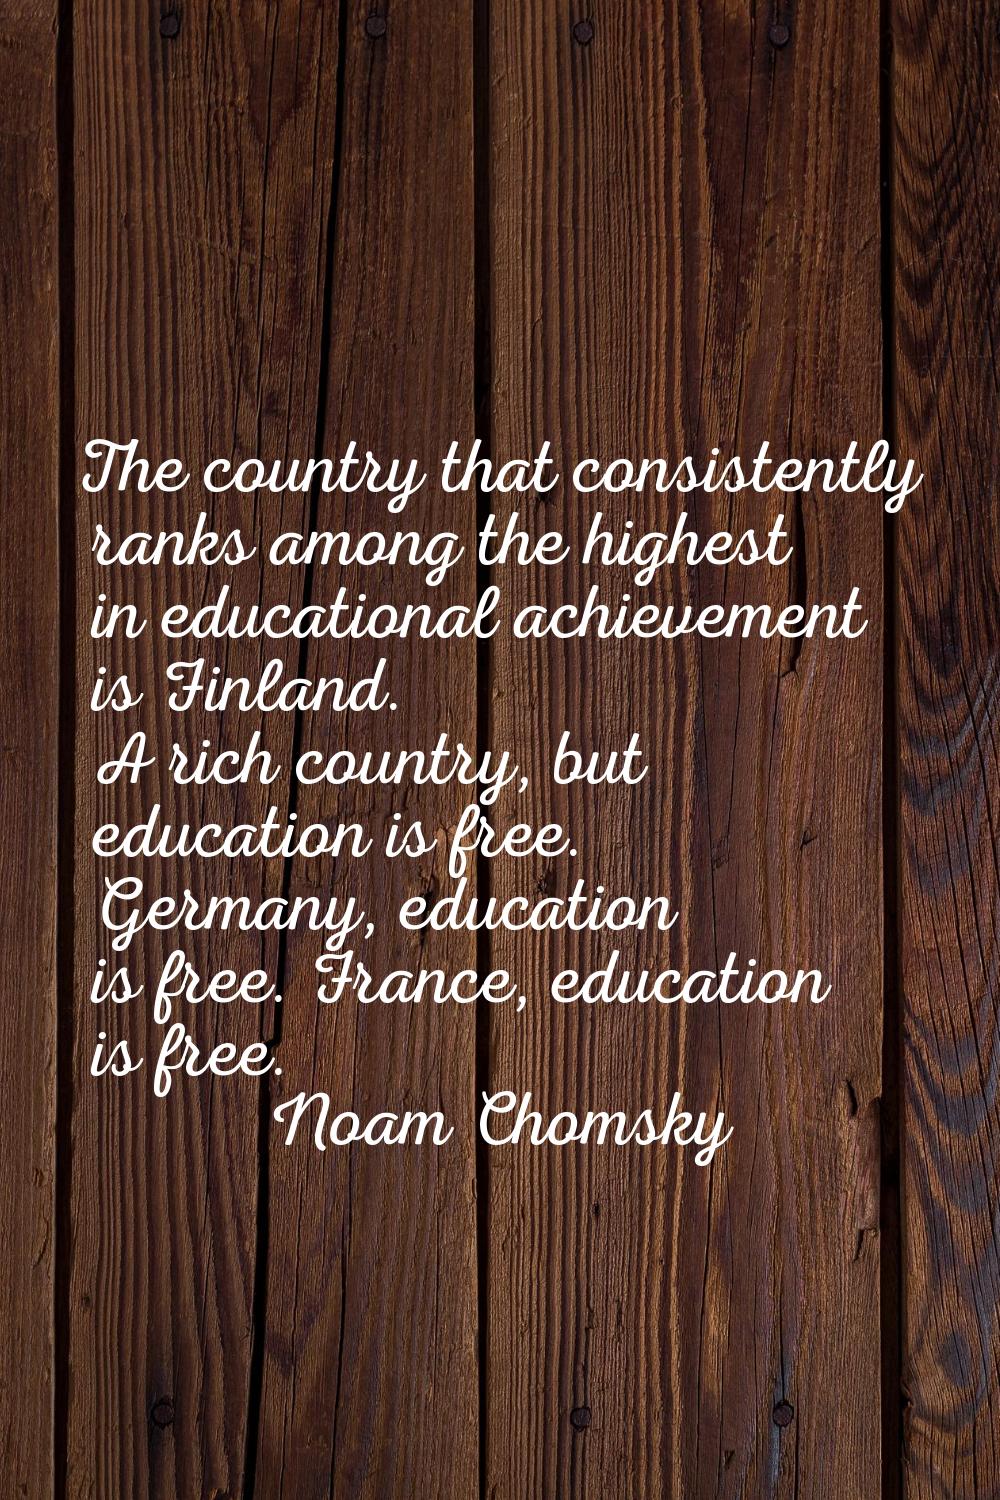 The country that consistently ranks among the highest in educational achievement is Finland. A rich